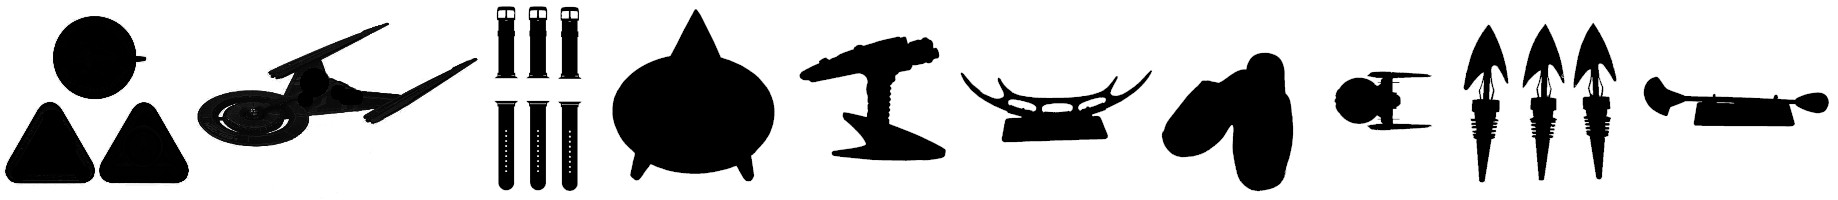 silhouettes of new Star Trek products